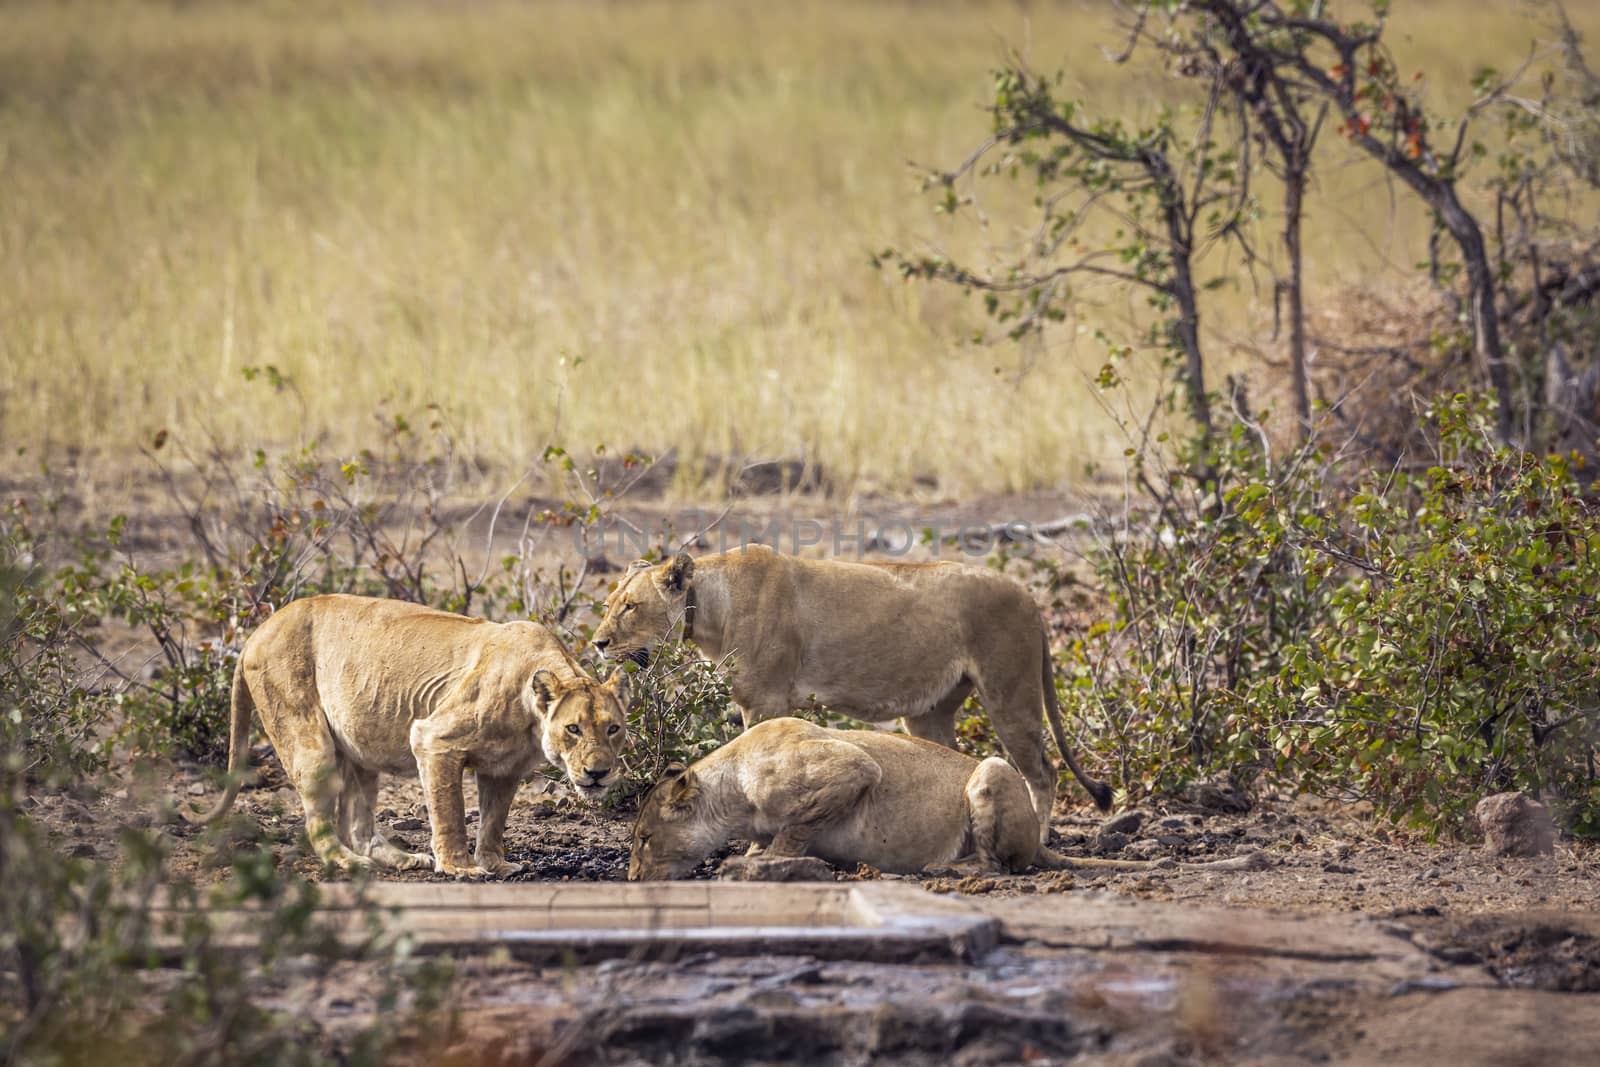 Three African lioness drinking at waterhole in Kruger National park, South Africa ; Specie Panthera leo family of Felidae